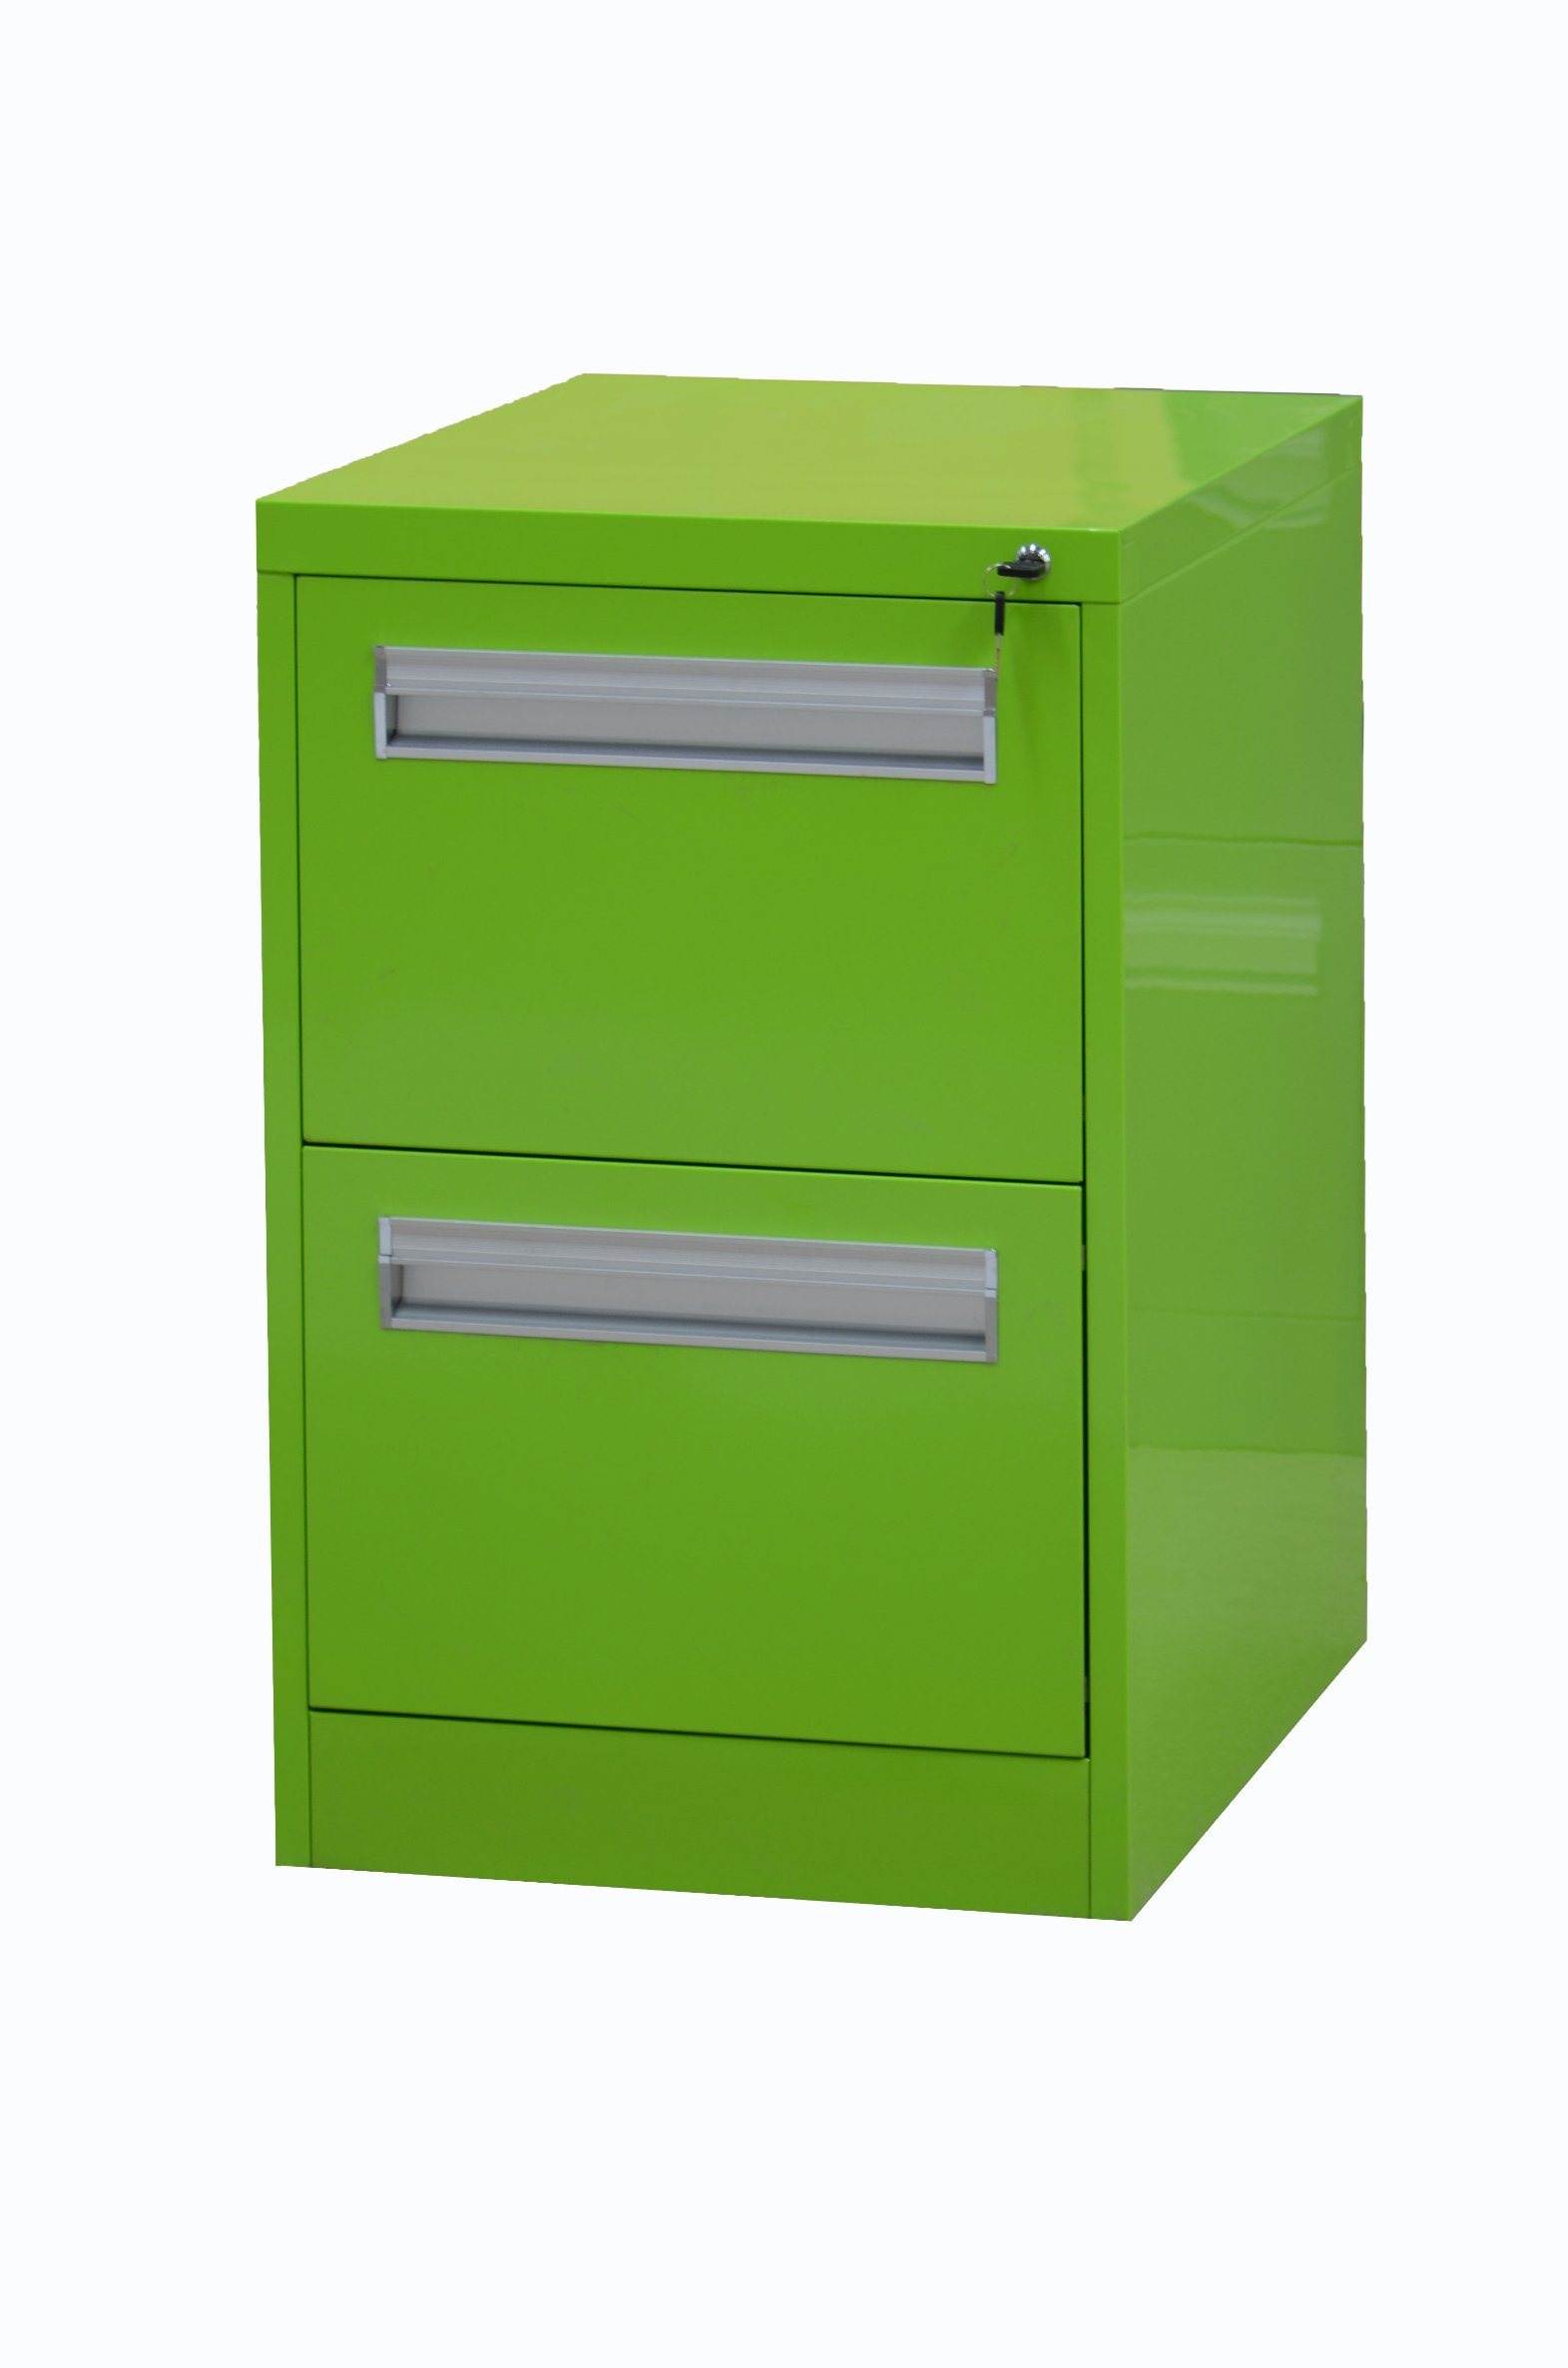 Roll-Over Construction Vertical 2 Drawers Filing Cabinet